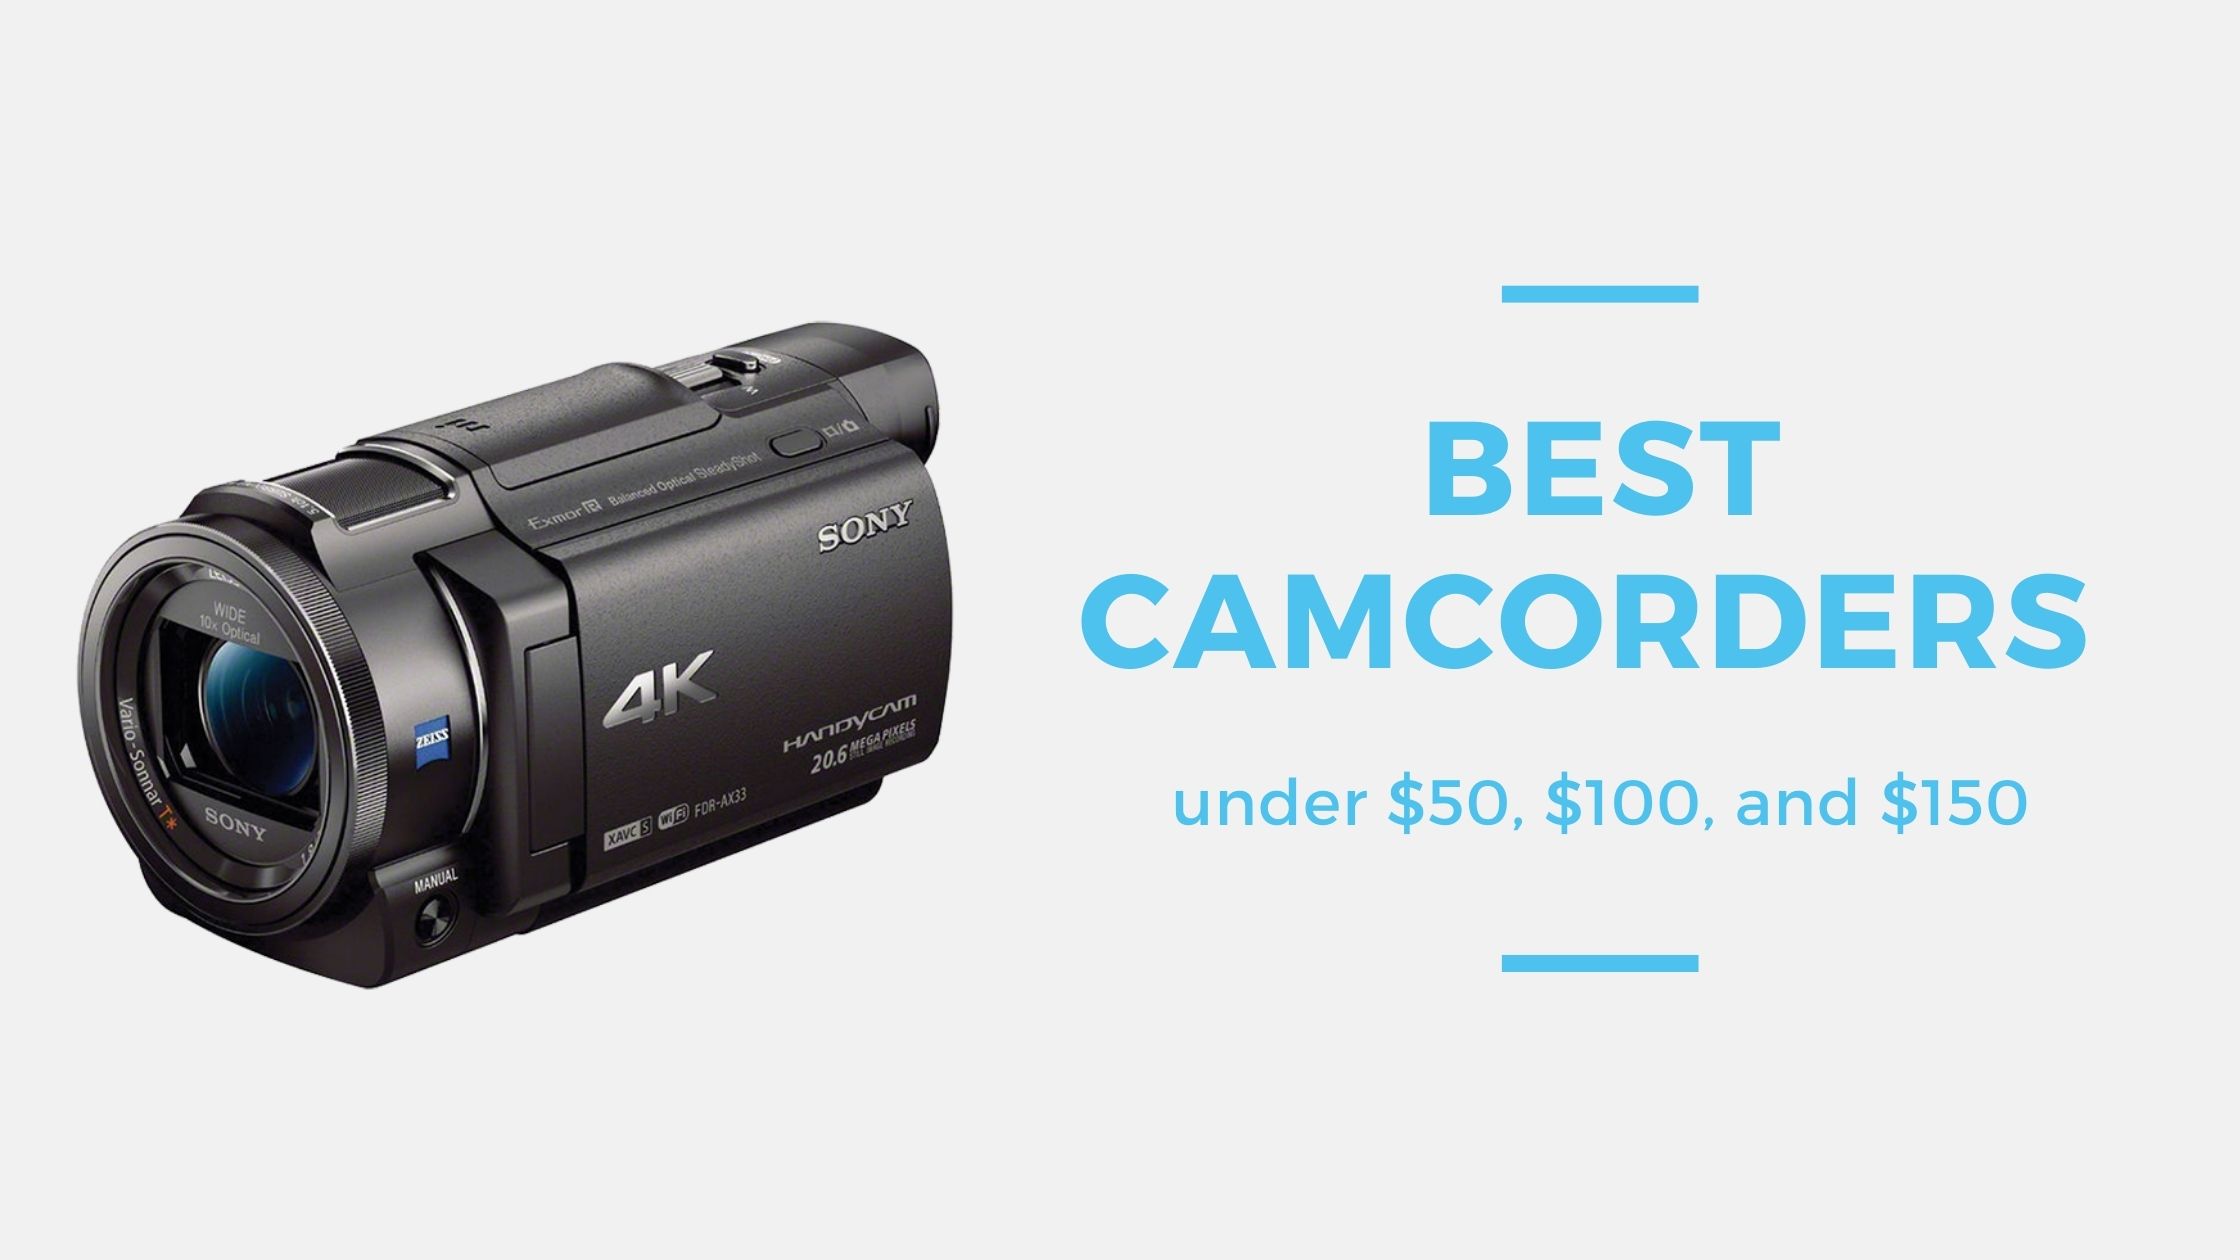 7 Best Camcorders under $50, $100, and $150